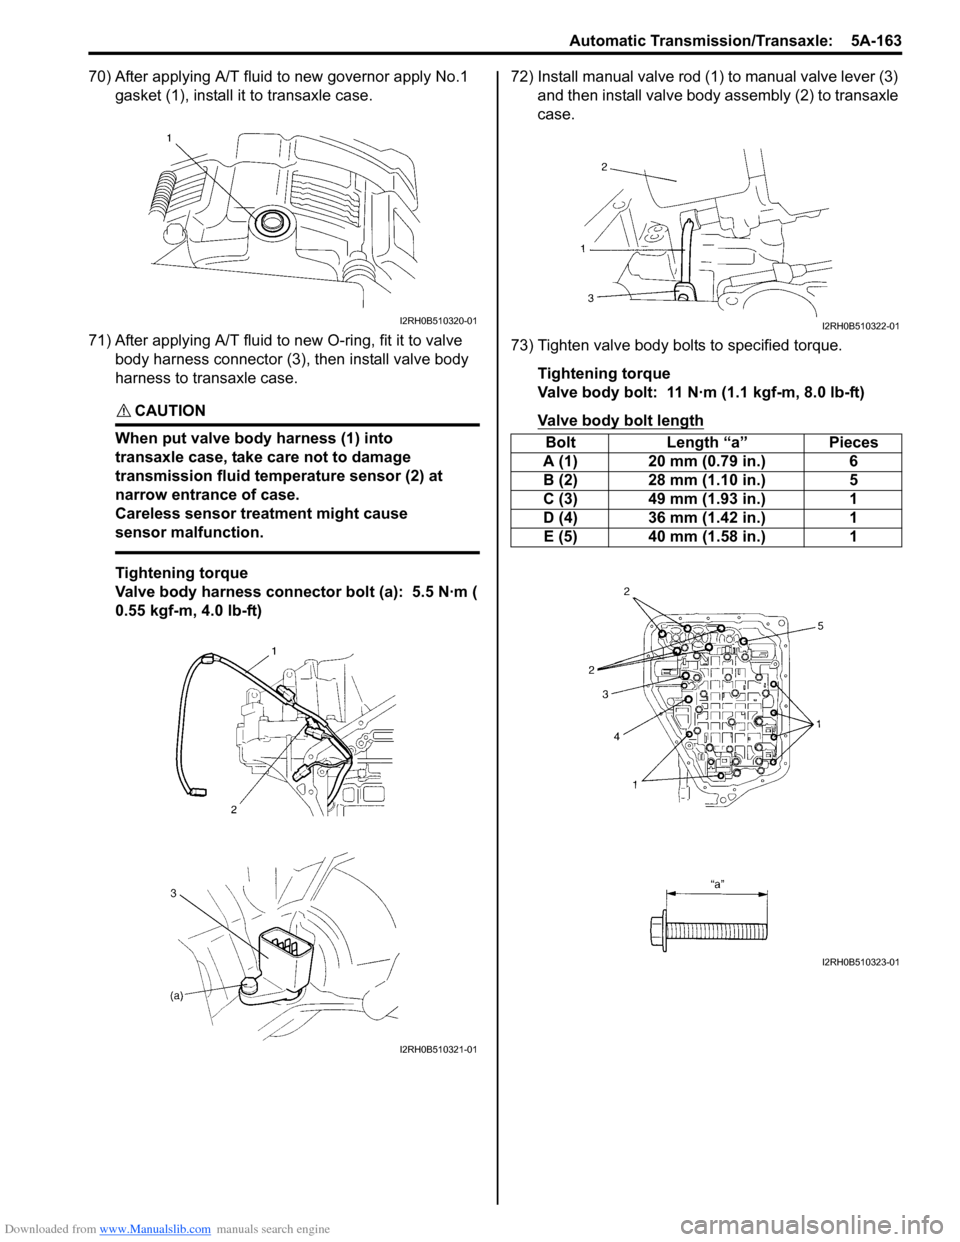 SUZUKI SWIFT 2007 2.G Service Workshop Manual Downloaded from www.Manualslib.com manuals search engine Automatic Transmission/Transaxle:  5A-163
70) After applying A/T fluid to new governor apply No.1 gasket (1), install it  to transaxle case.
71